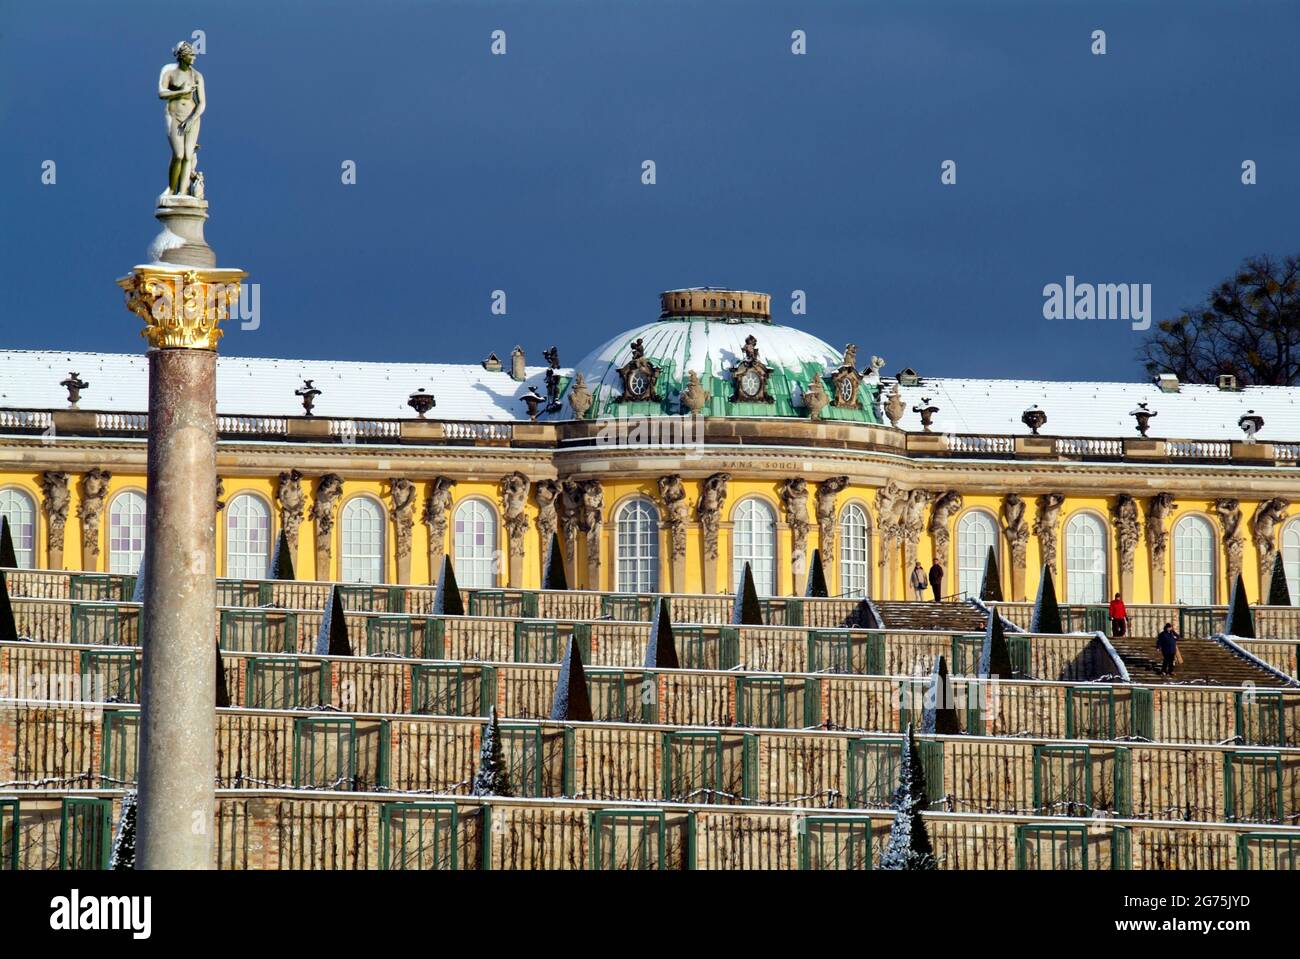 Snow covered Sanssouci Castle and vineyard Stock Photo